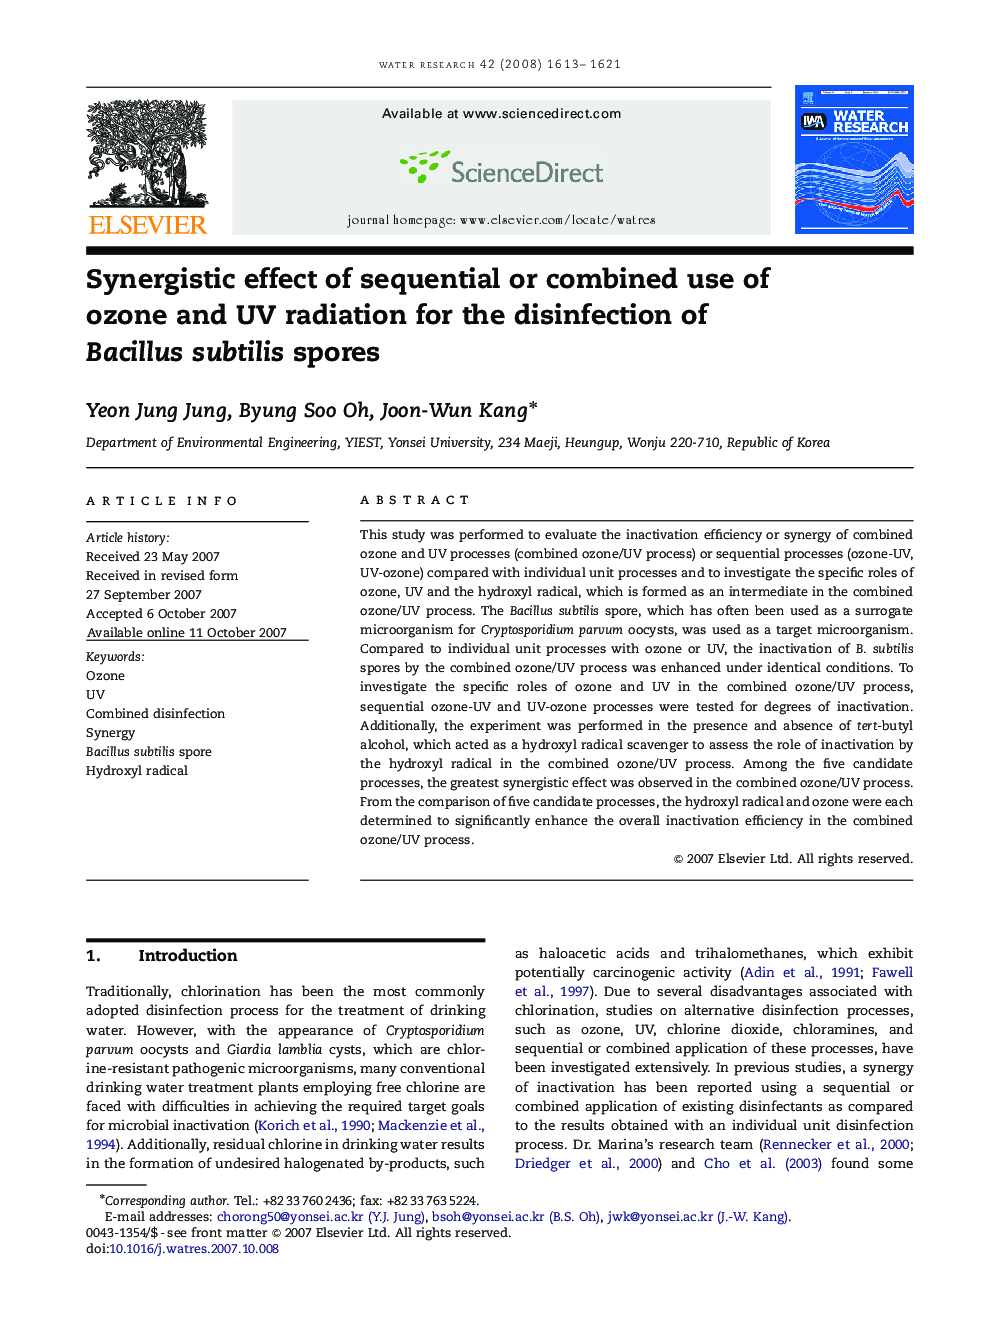 Synergistic effect of sequential or combined use of ozone and UV radiation for the disinfection of Bacillus subtilis spores